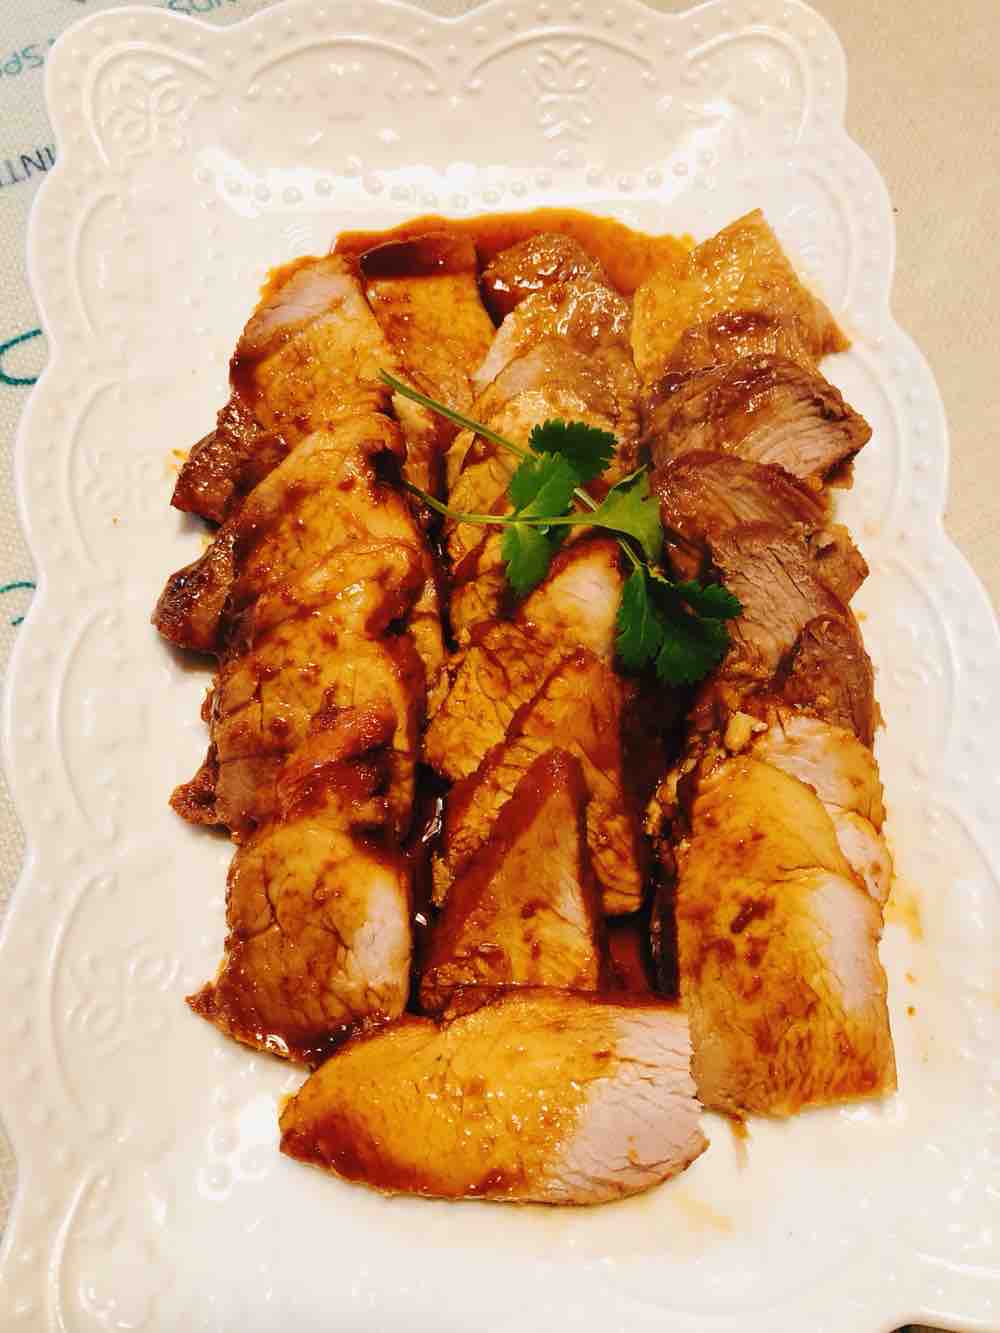 Rice Cooker Honey Sauce Barbecued Pork